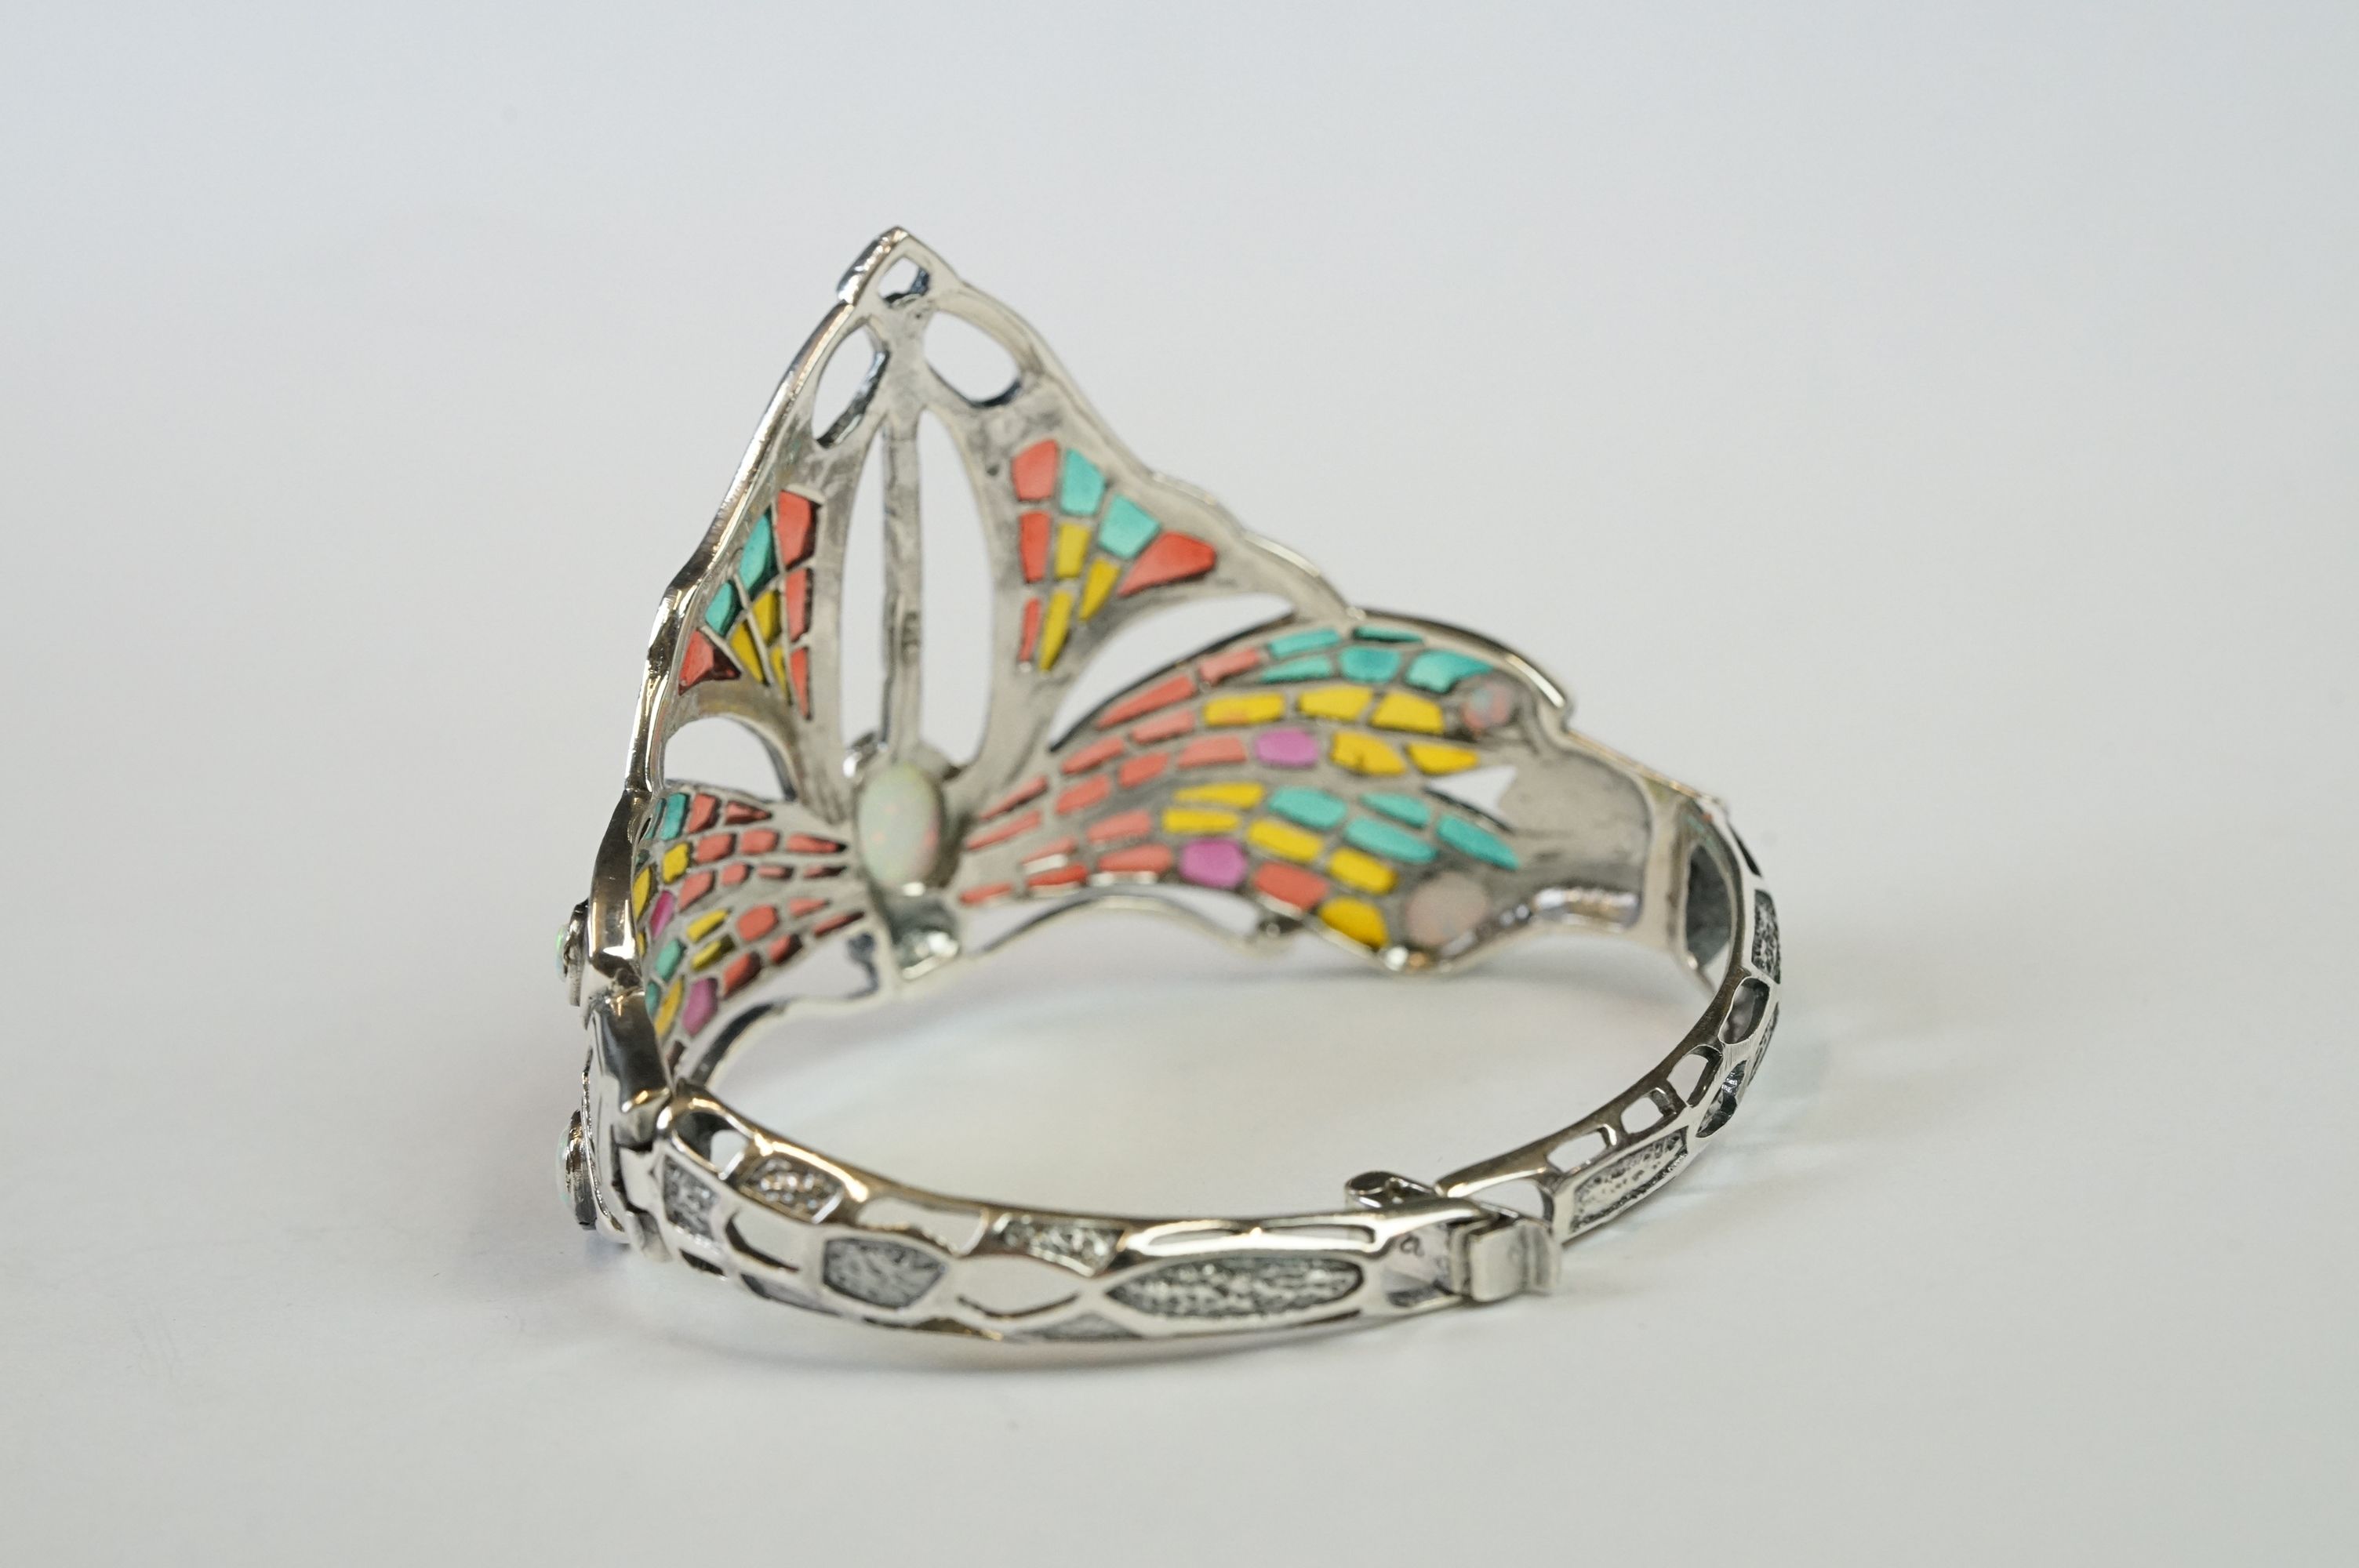 Large Silver Plique a Jour Cuff Bangle in the Art Deco style with opal cabochons - Image 4 of 11